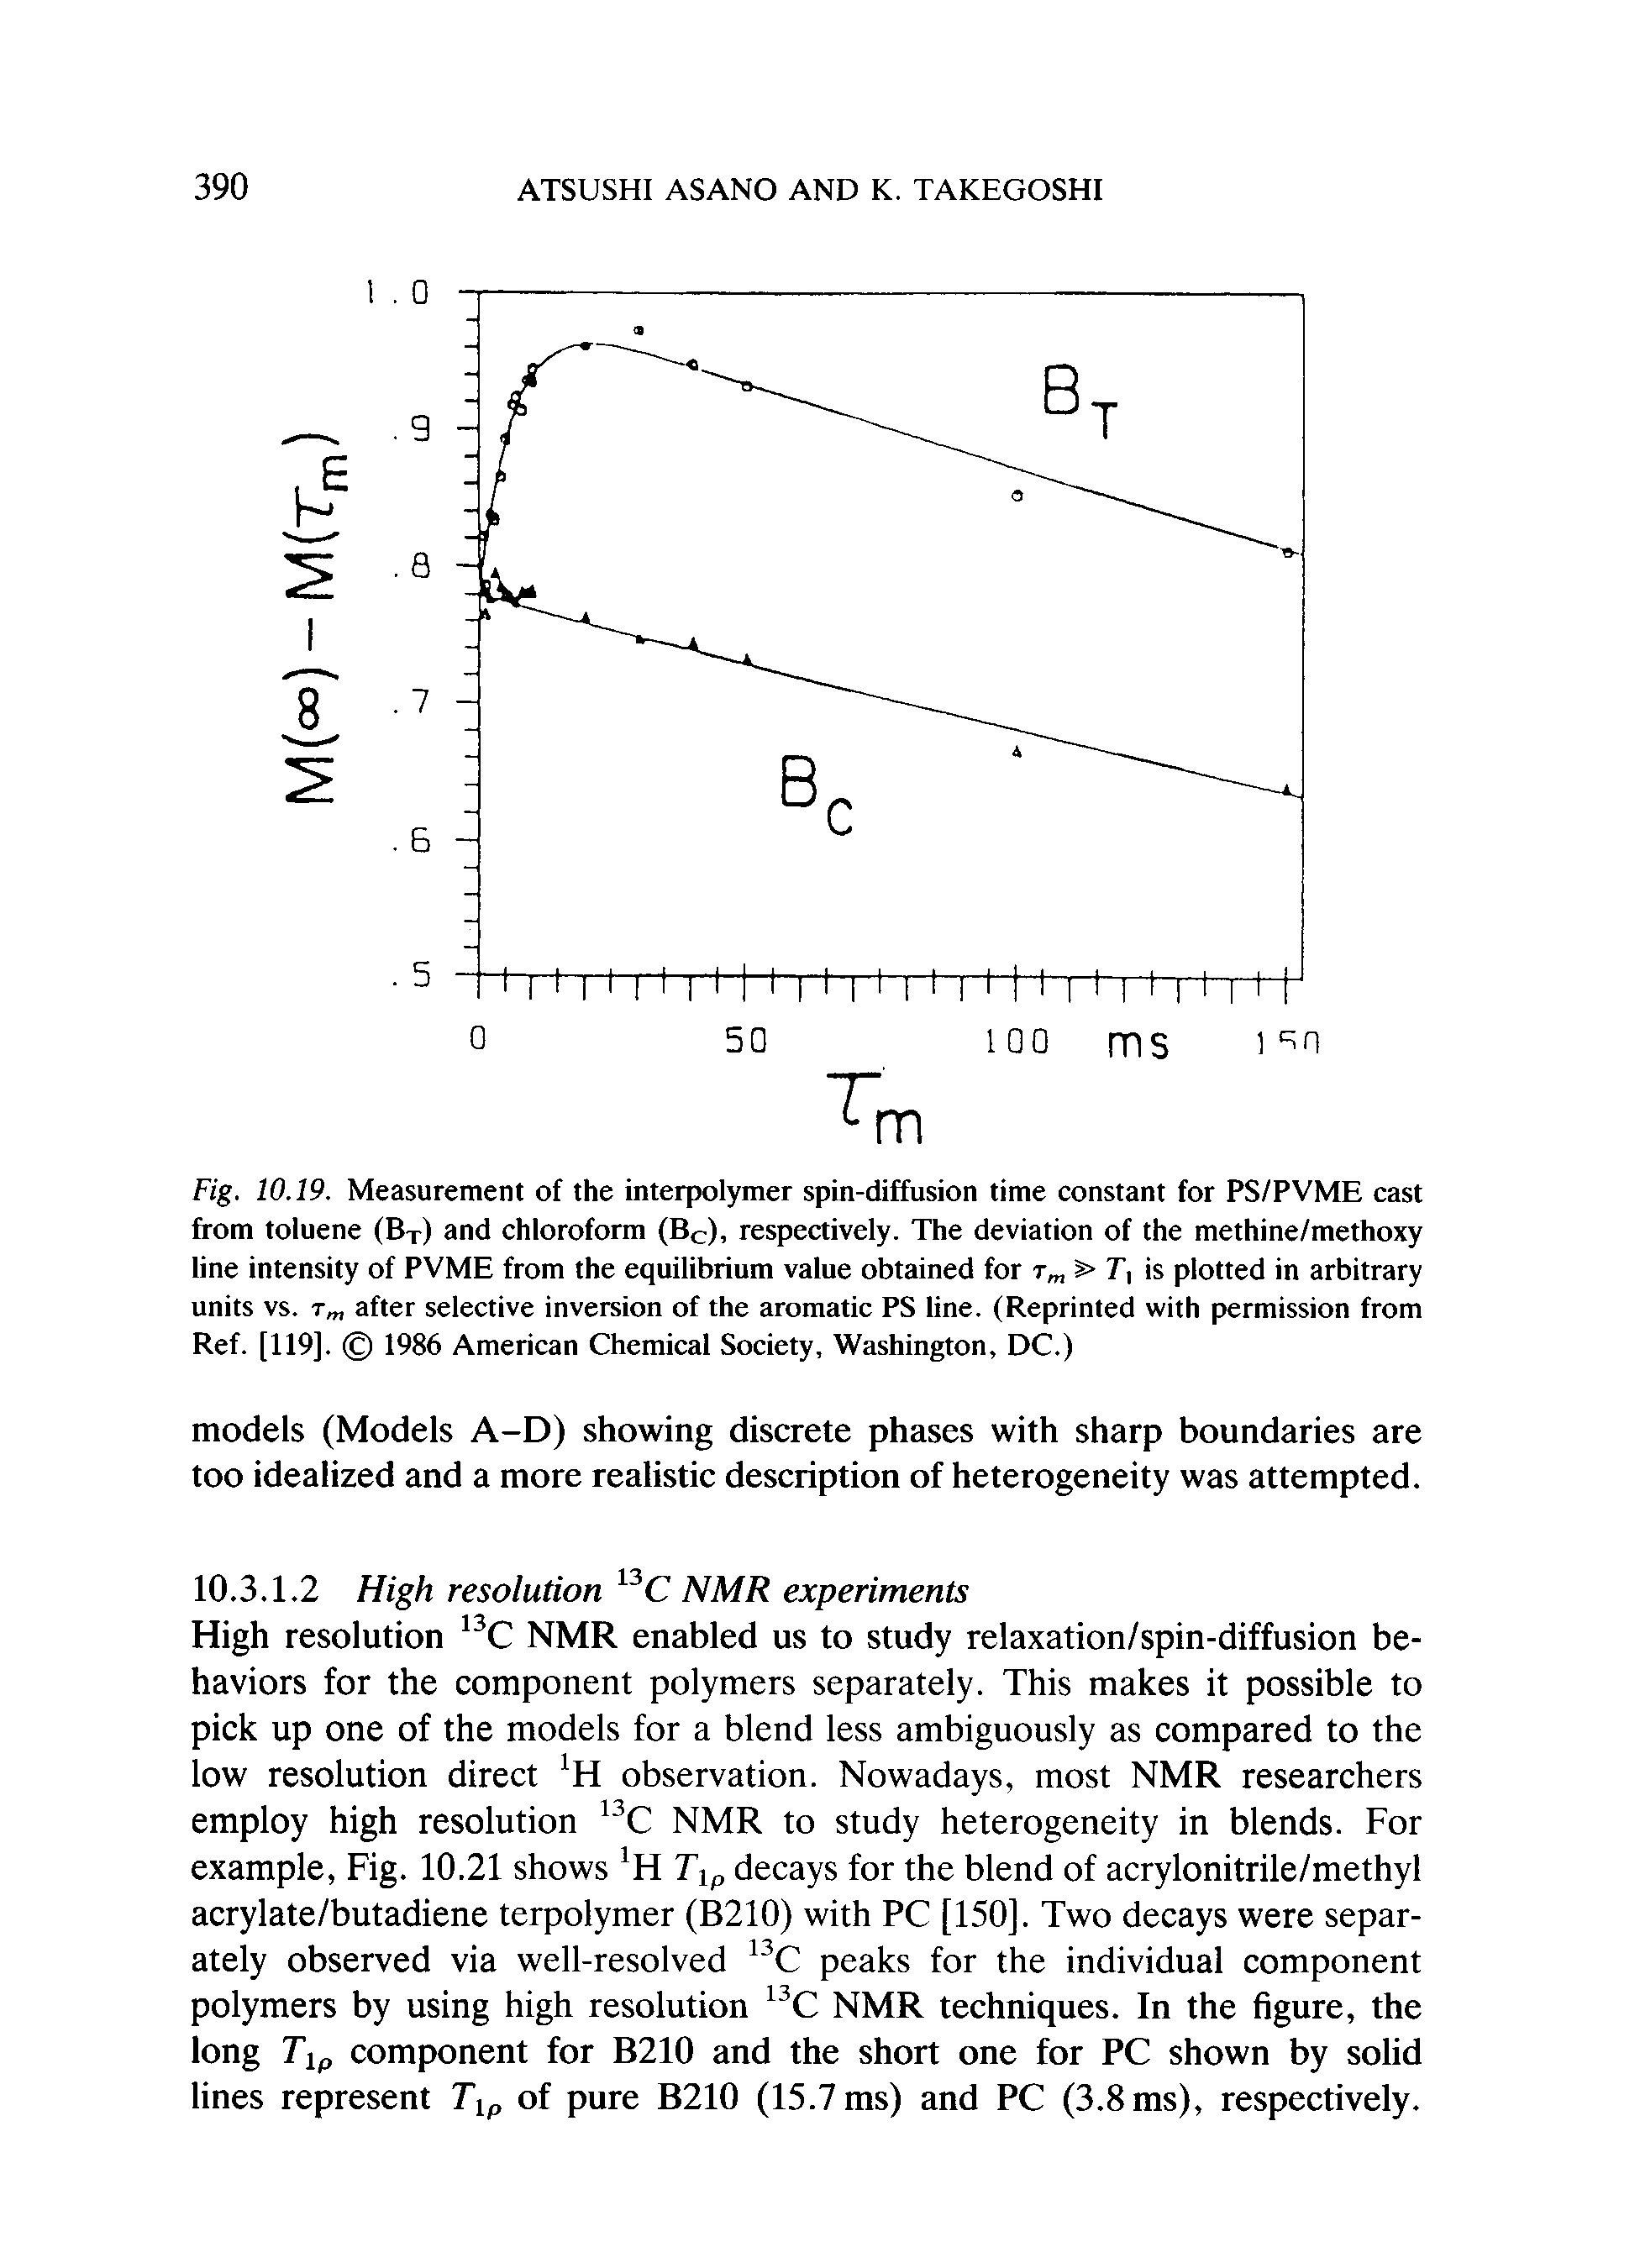 Fig. 10.19. Measurement of the interpolymer spin-diffusion time constant for PS/PVME cast from toluene (Bt) and chloroform (Be), respectively. The deviation of the methine/methoxy line intensity of PVME from the equilibrium value obtained for > T, is plotted in arbitrary units vs. T after selective inversion of the aromatic PS line. (Reprinted with permission from Ref. [119]. 1986 American Chemical Society, Washington, DC.)...